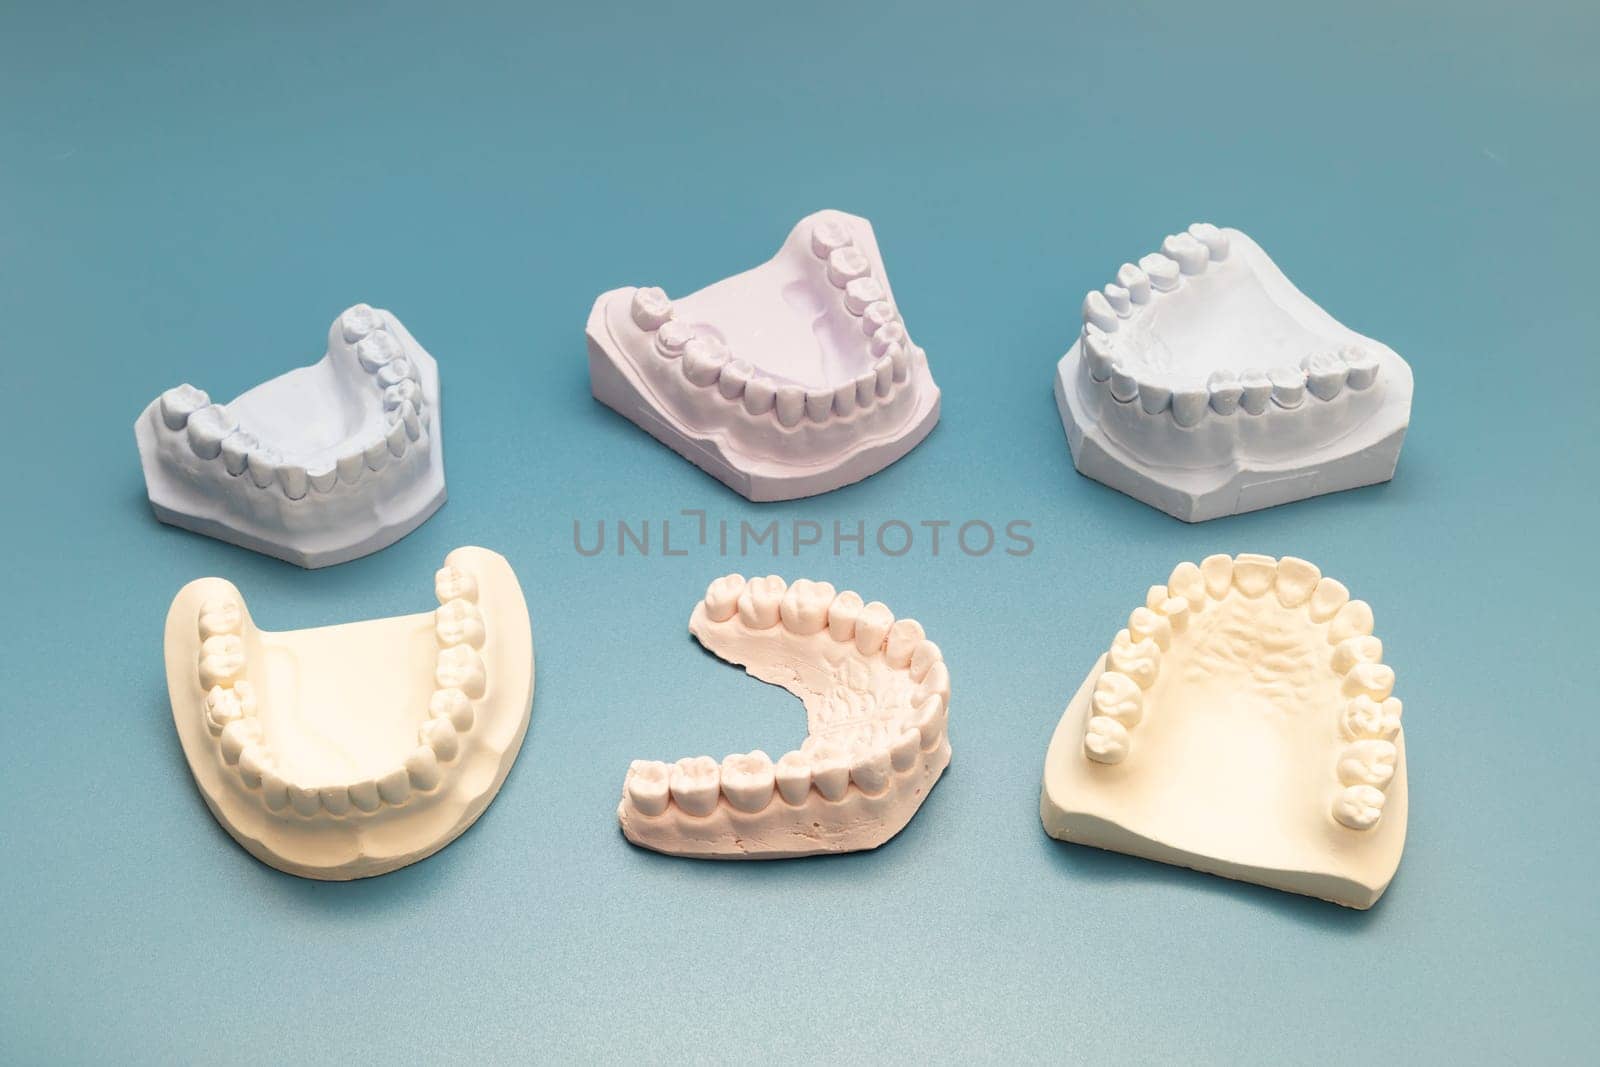 Many Die Stone, Plaster Cast Molds Of The Upper And Lower Jaws And Teeth With A Pliable Imprint In Dental Lab On Blue Background. Denture. Dental Gypsum Model, Prosthetics. Horizontal. by netatsi